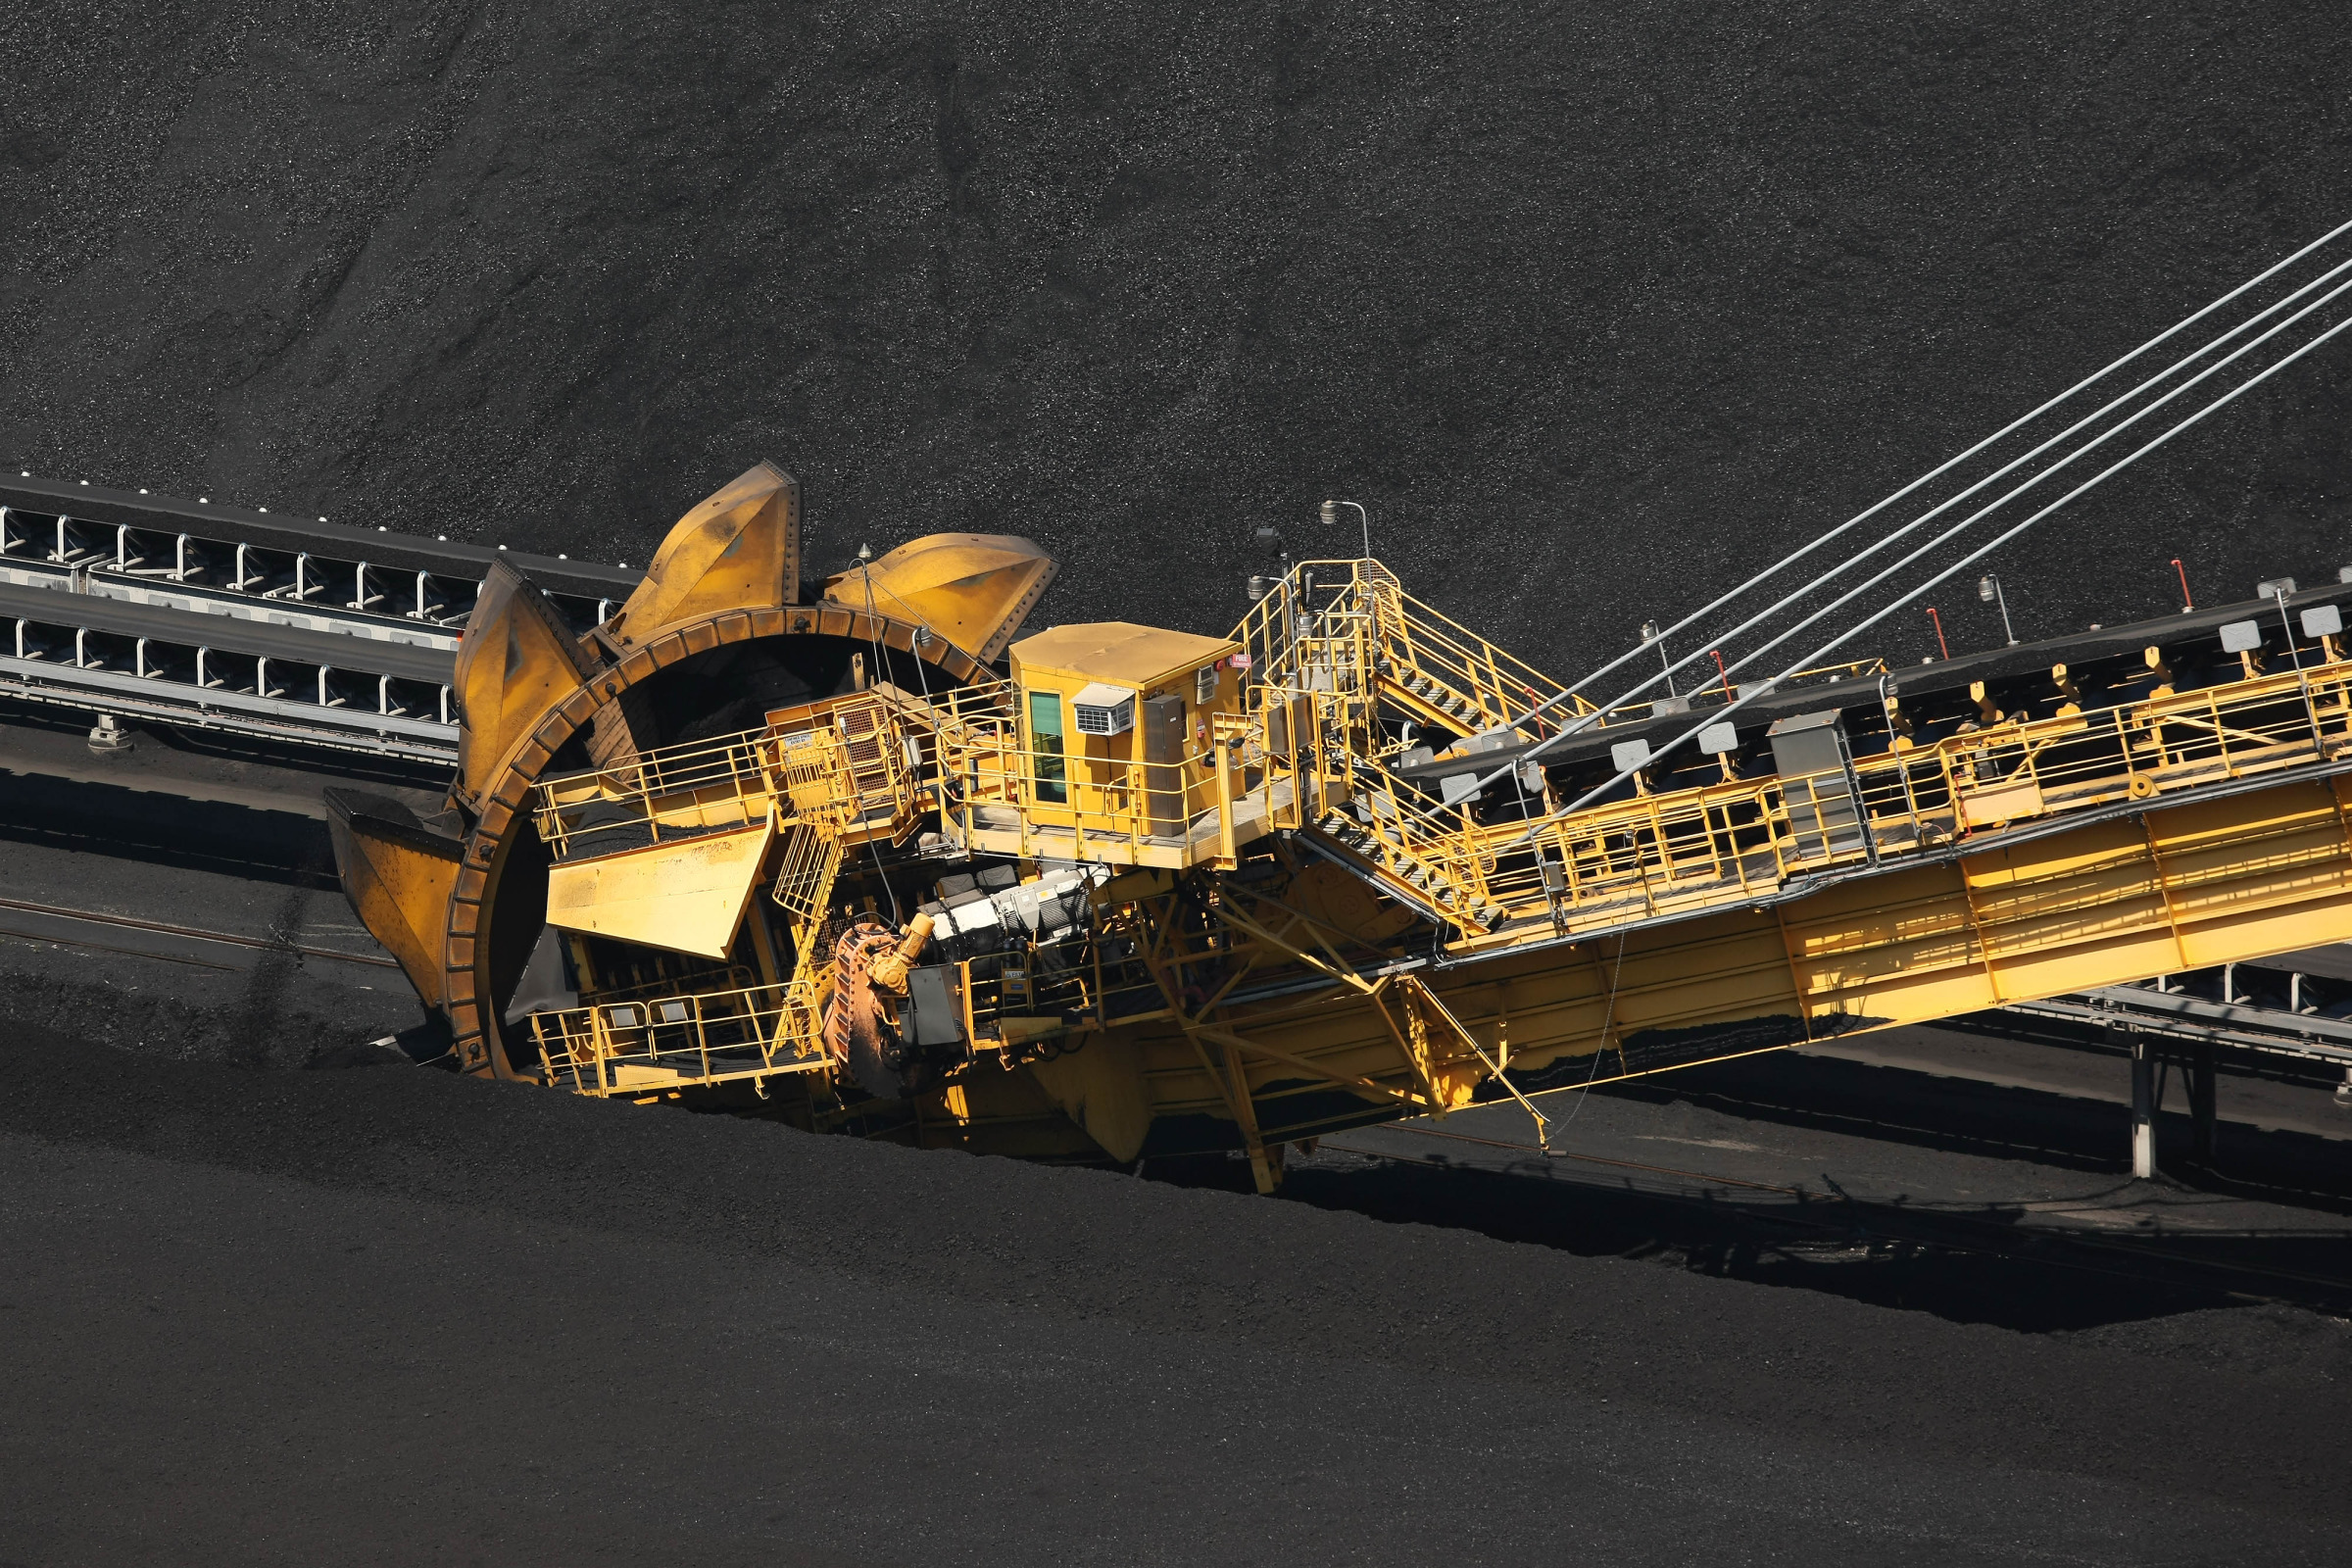 Bluebell Capital urges Glencore to exit thermal coal, improve corporate  governance - report